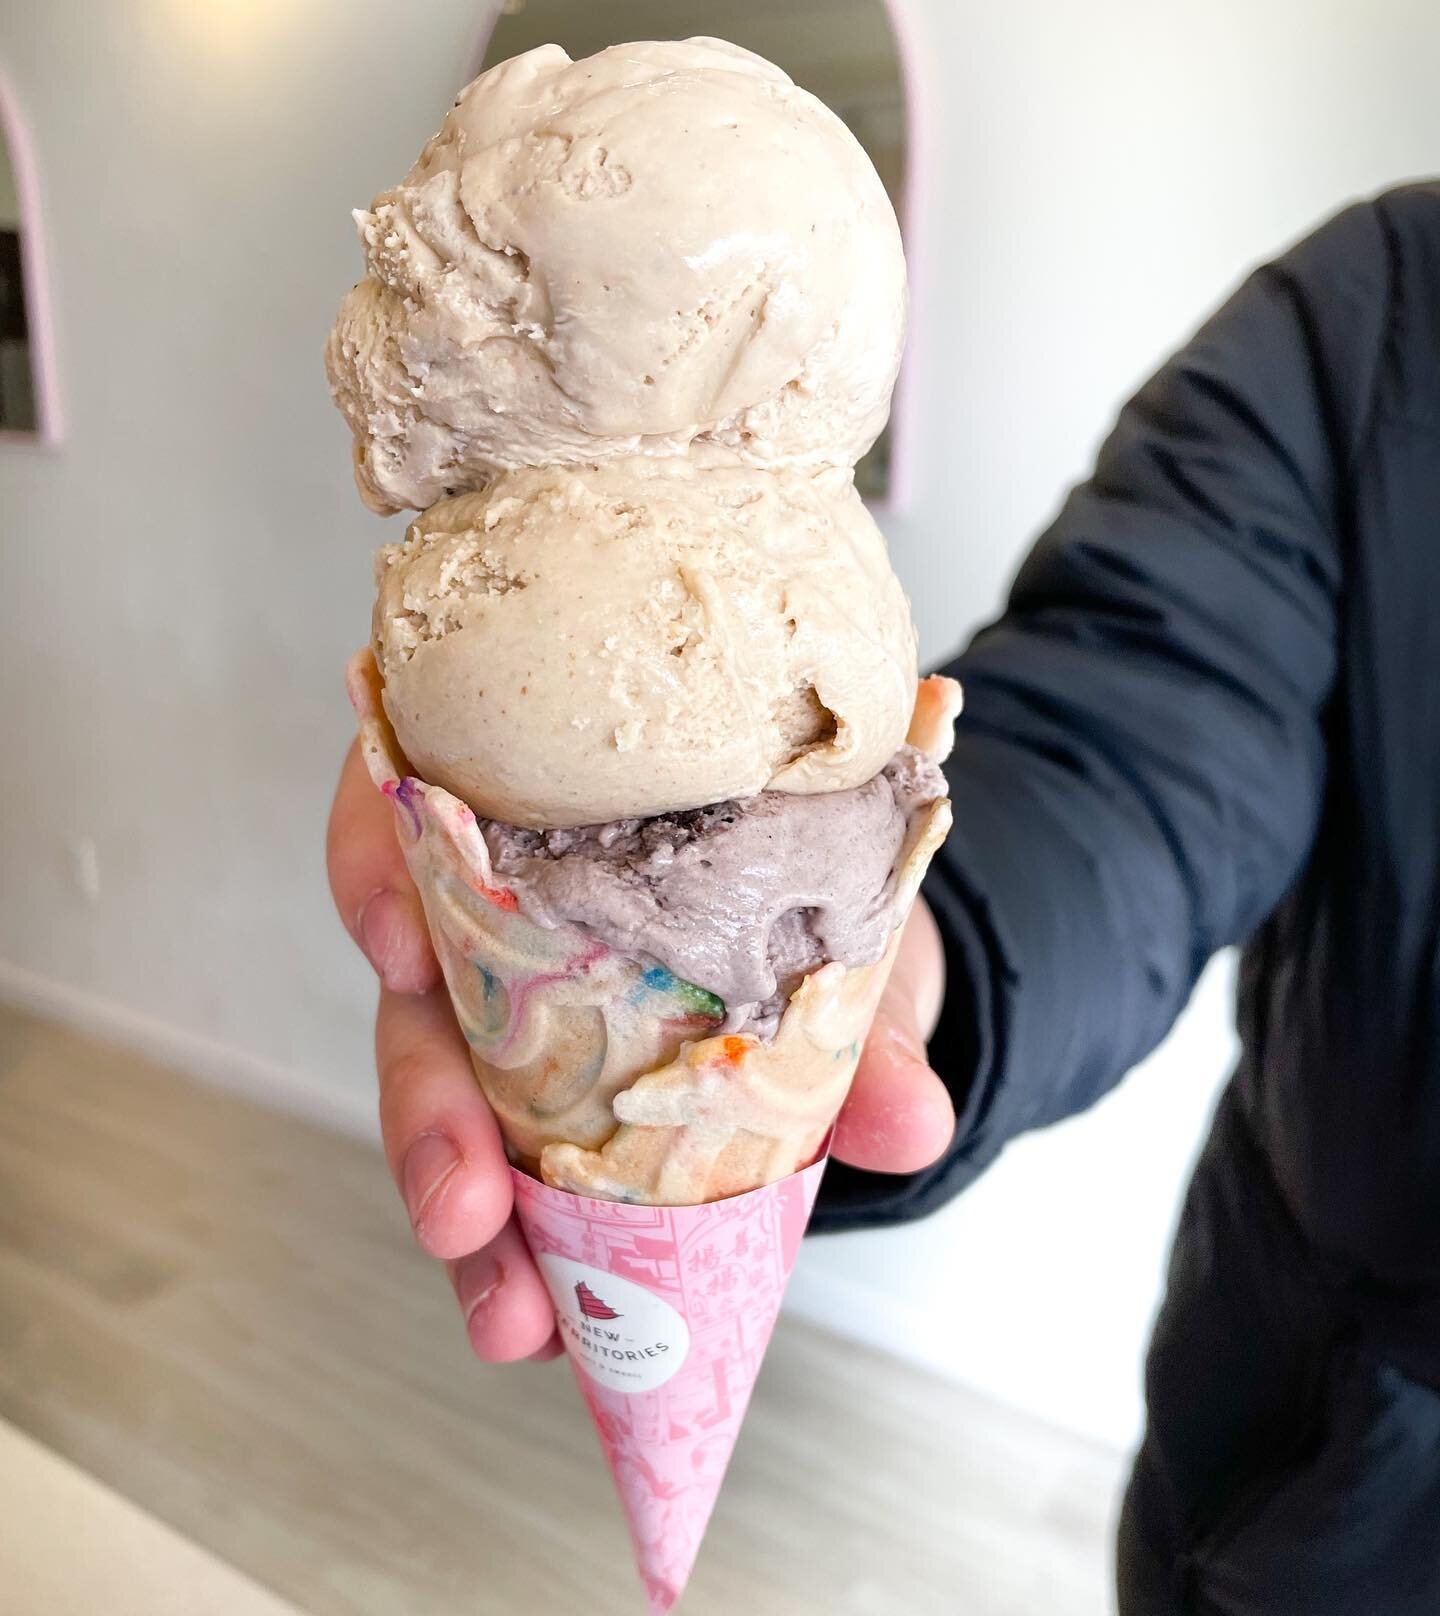 What does your triple scoop look like? 🍨 this is Cookie Dough Oreo, Like Tokyo Banana 🍌, and Earl Grey on a birthday cake cone 

Earl Grey has now taken the bench seat to allow us to introduce THAI TEA. A popular flavor this week! Tag your Thai Tea